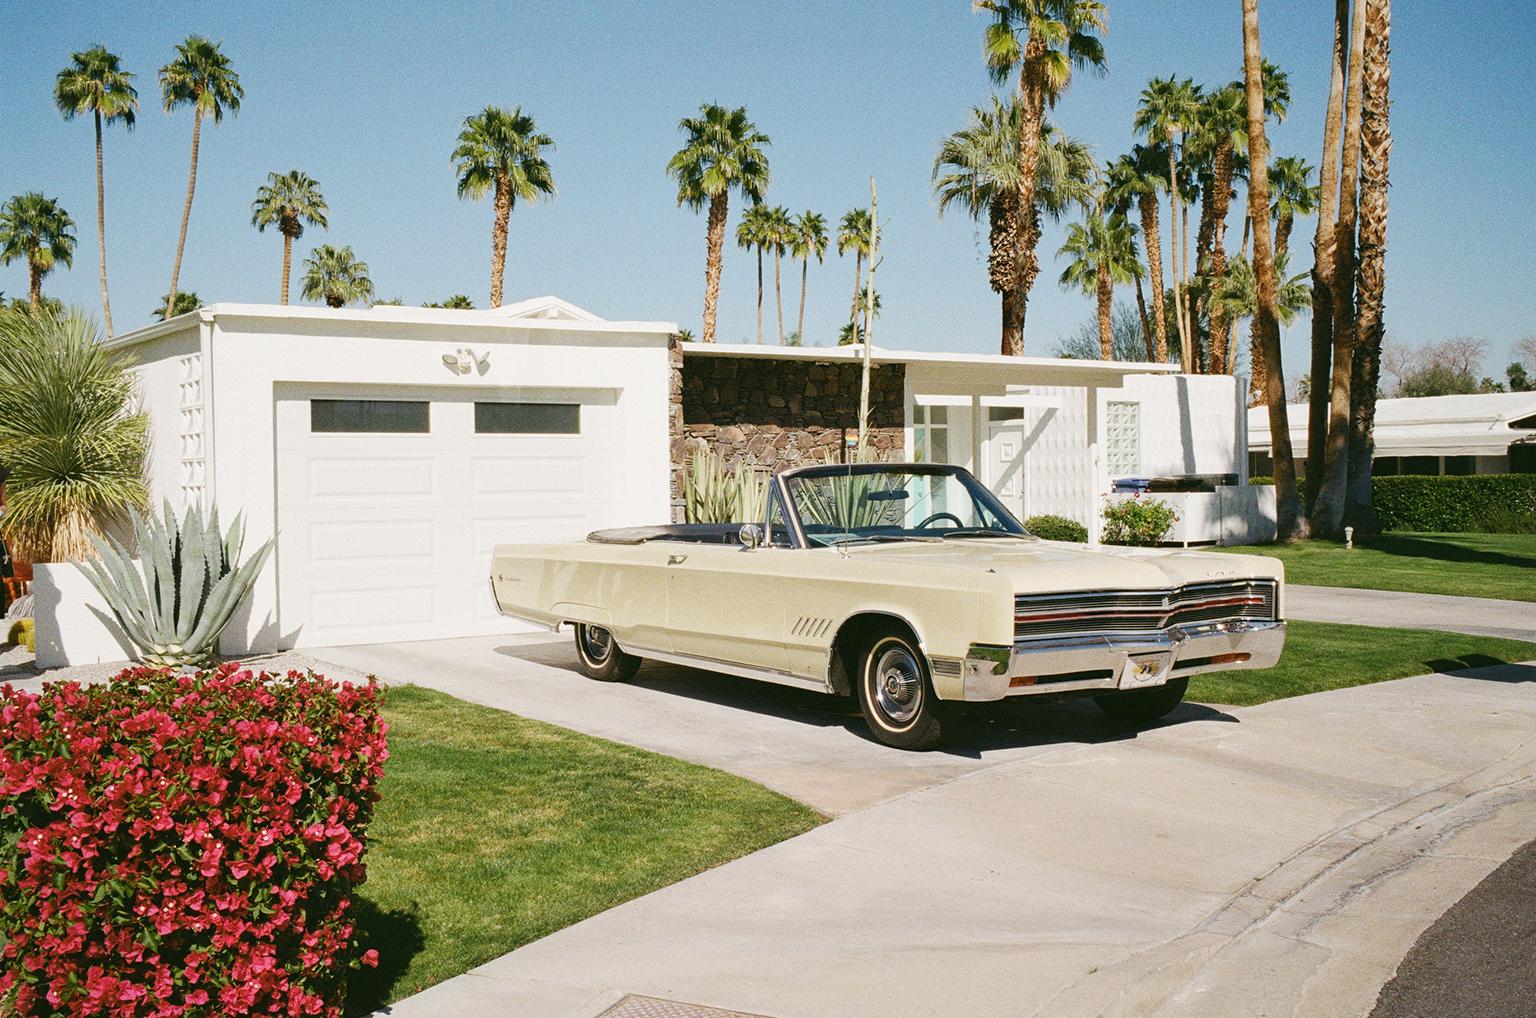 Chrysler 300, Palm Springs, CA., 2020. Archival Dye Piment Print. 24” x 30”, Edition of 15.
_________________________________________________________________________________
Signed, Dated and Numbered on the Reverse.

Jim Ryce has focused on the